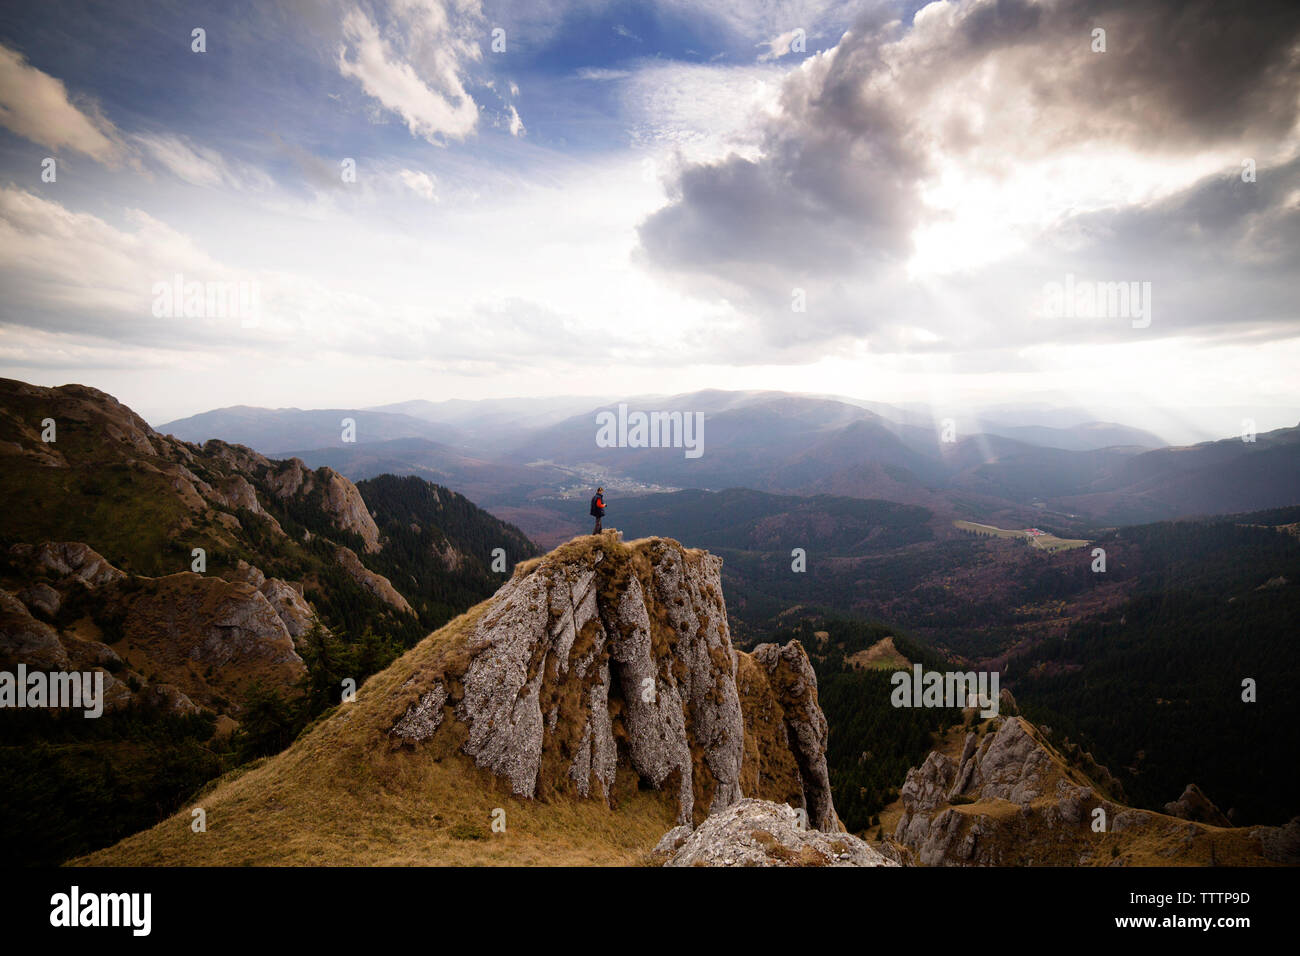 Man standing on cliff against cloudy sky Stock Photo